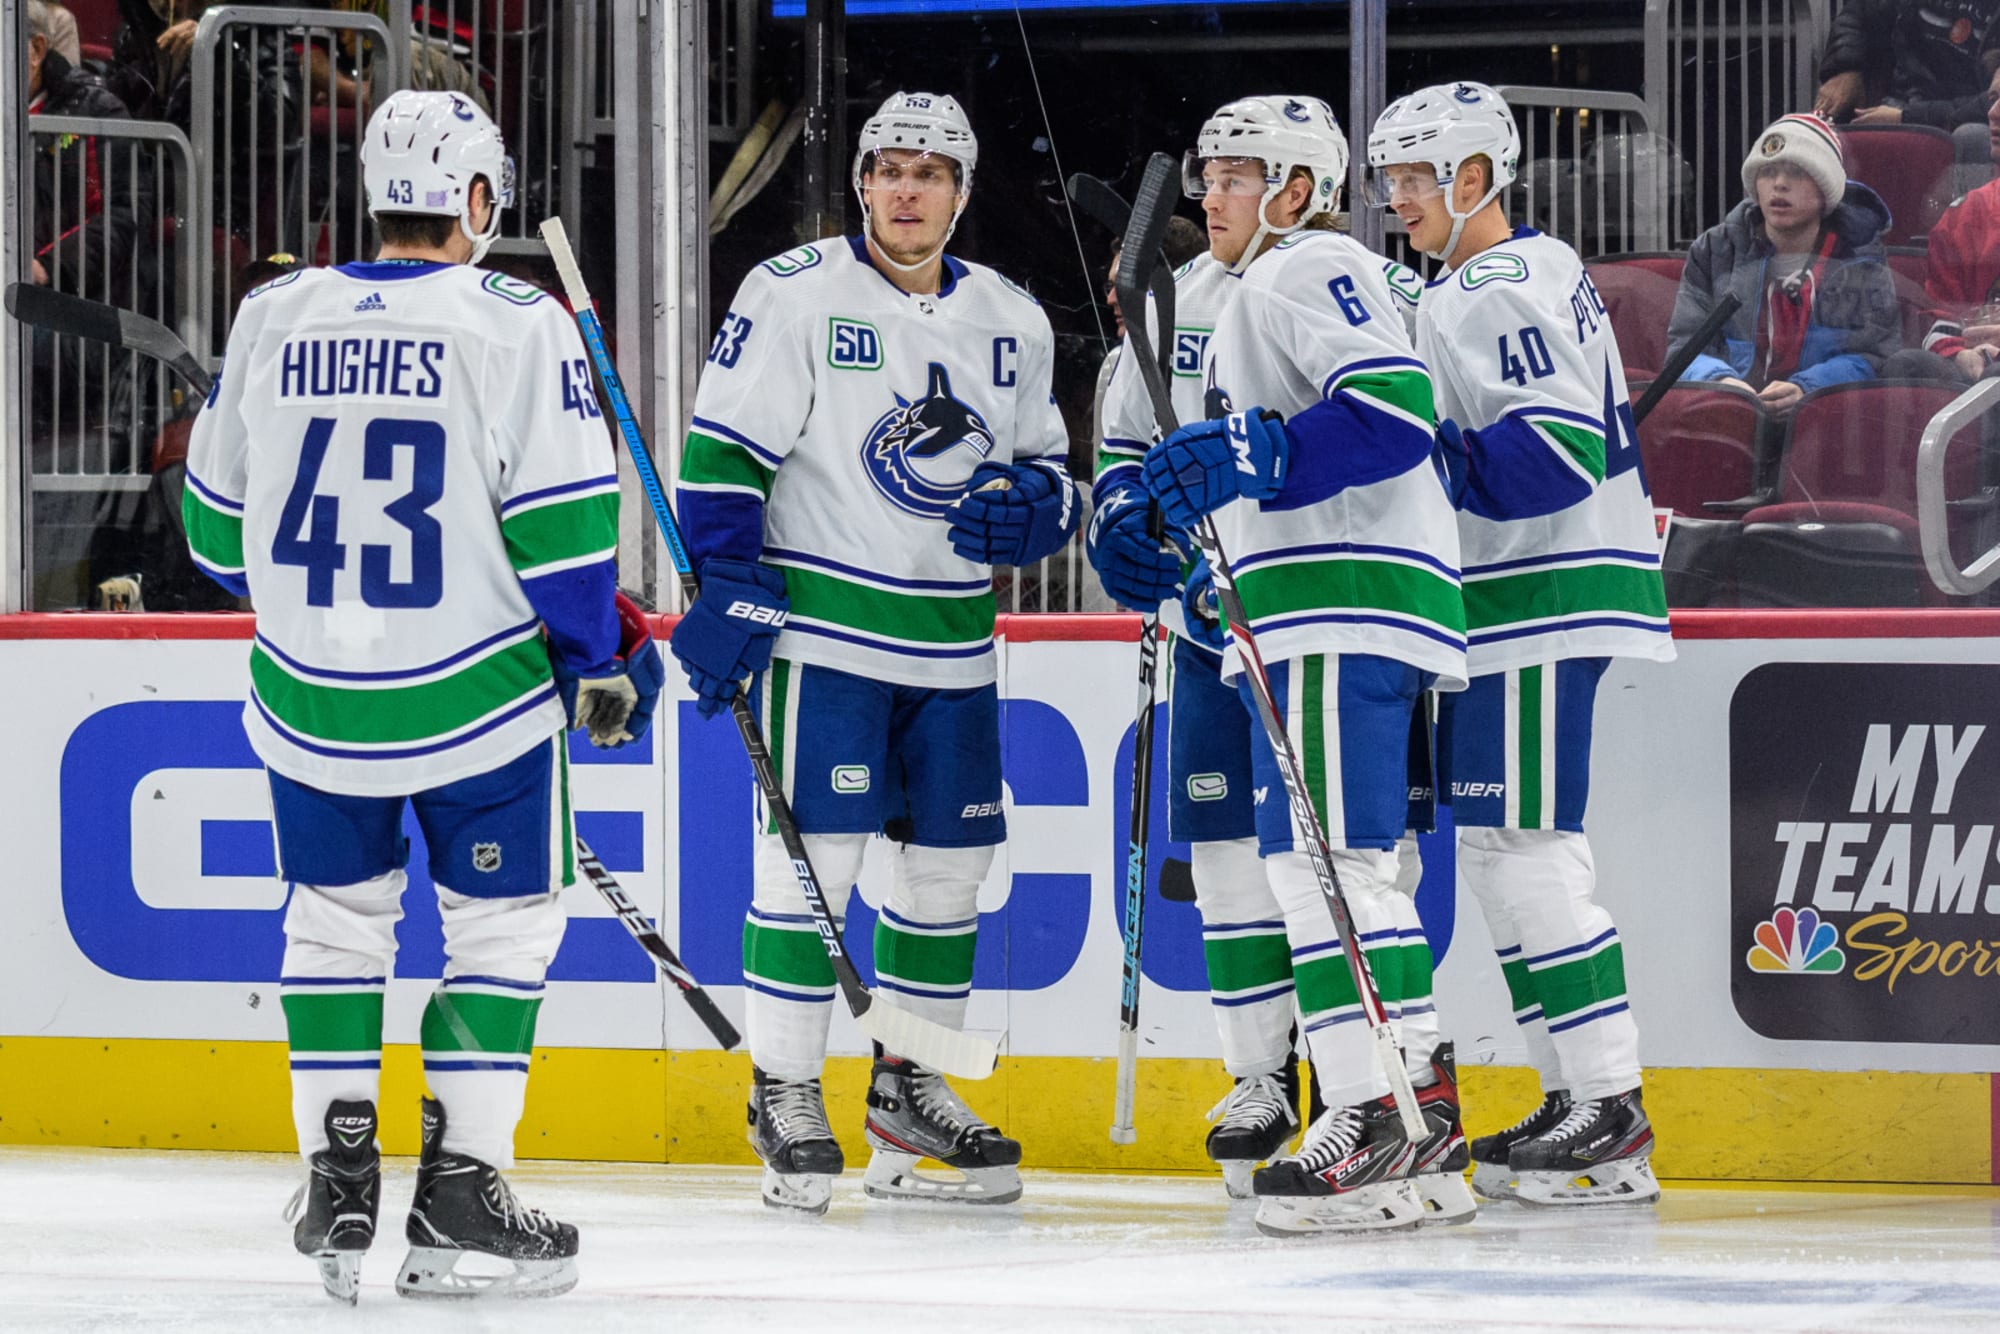 Are the Canucks the team to beat in the Pacific Division?